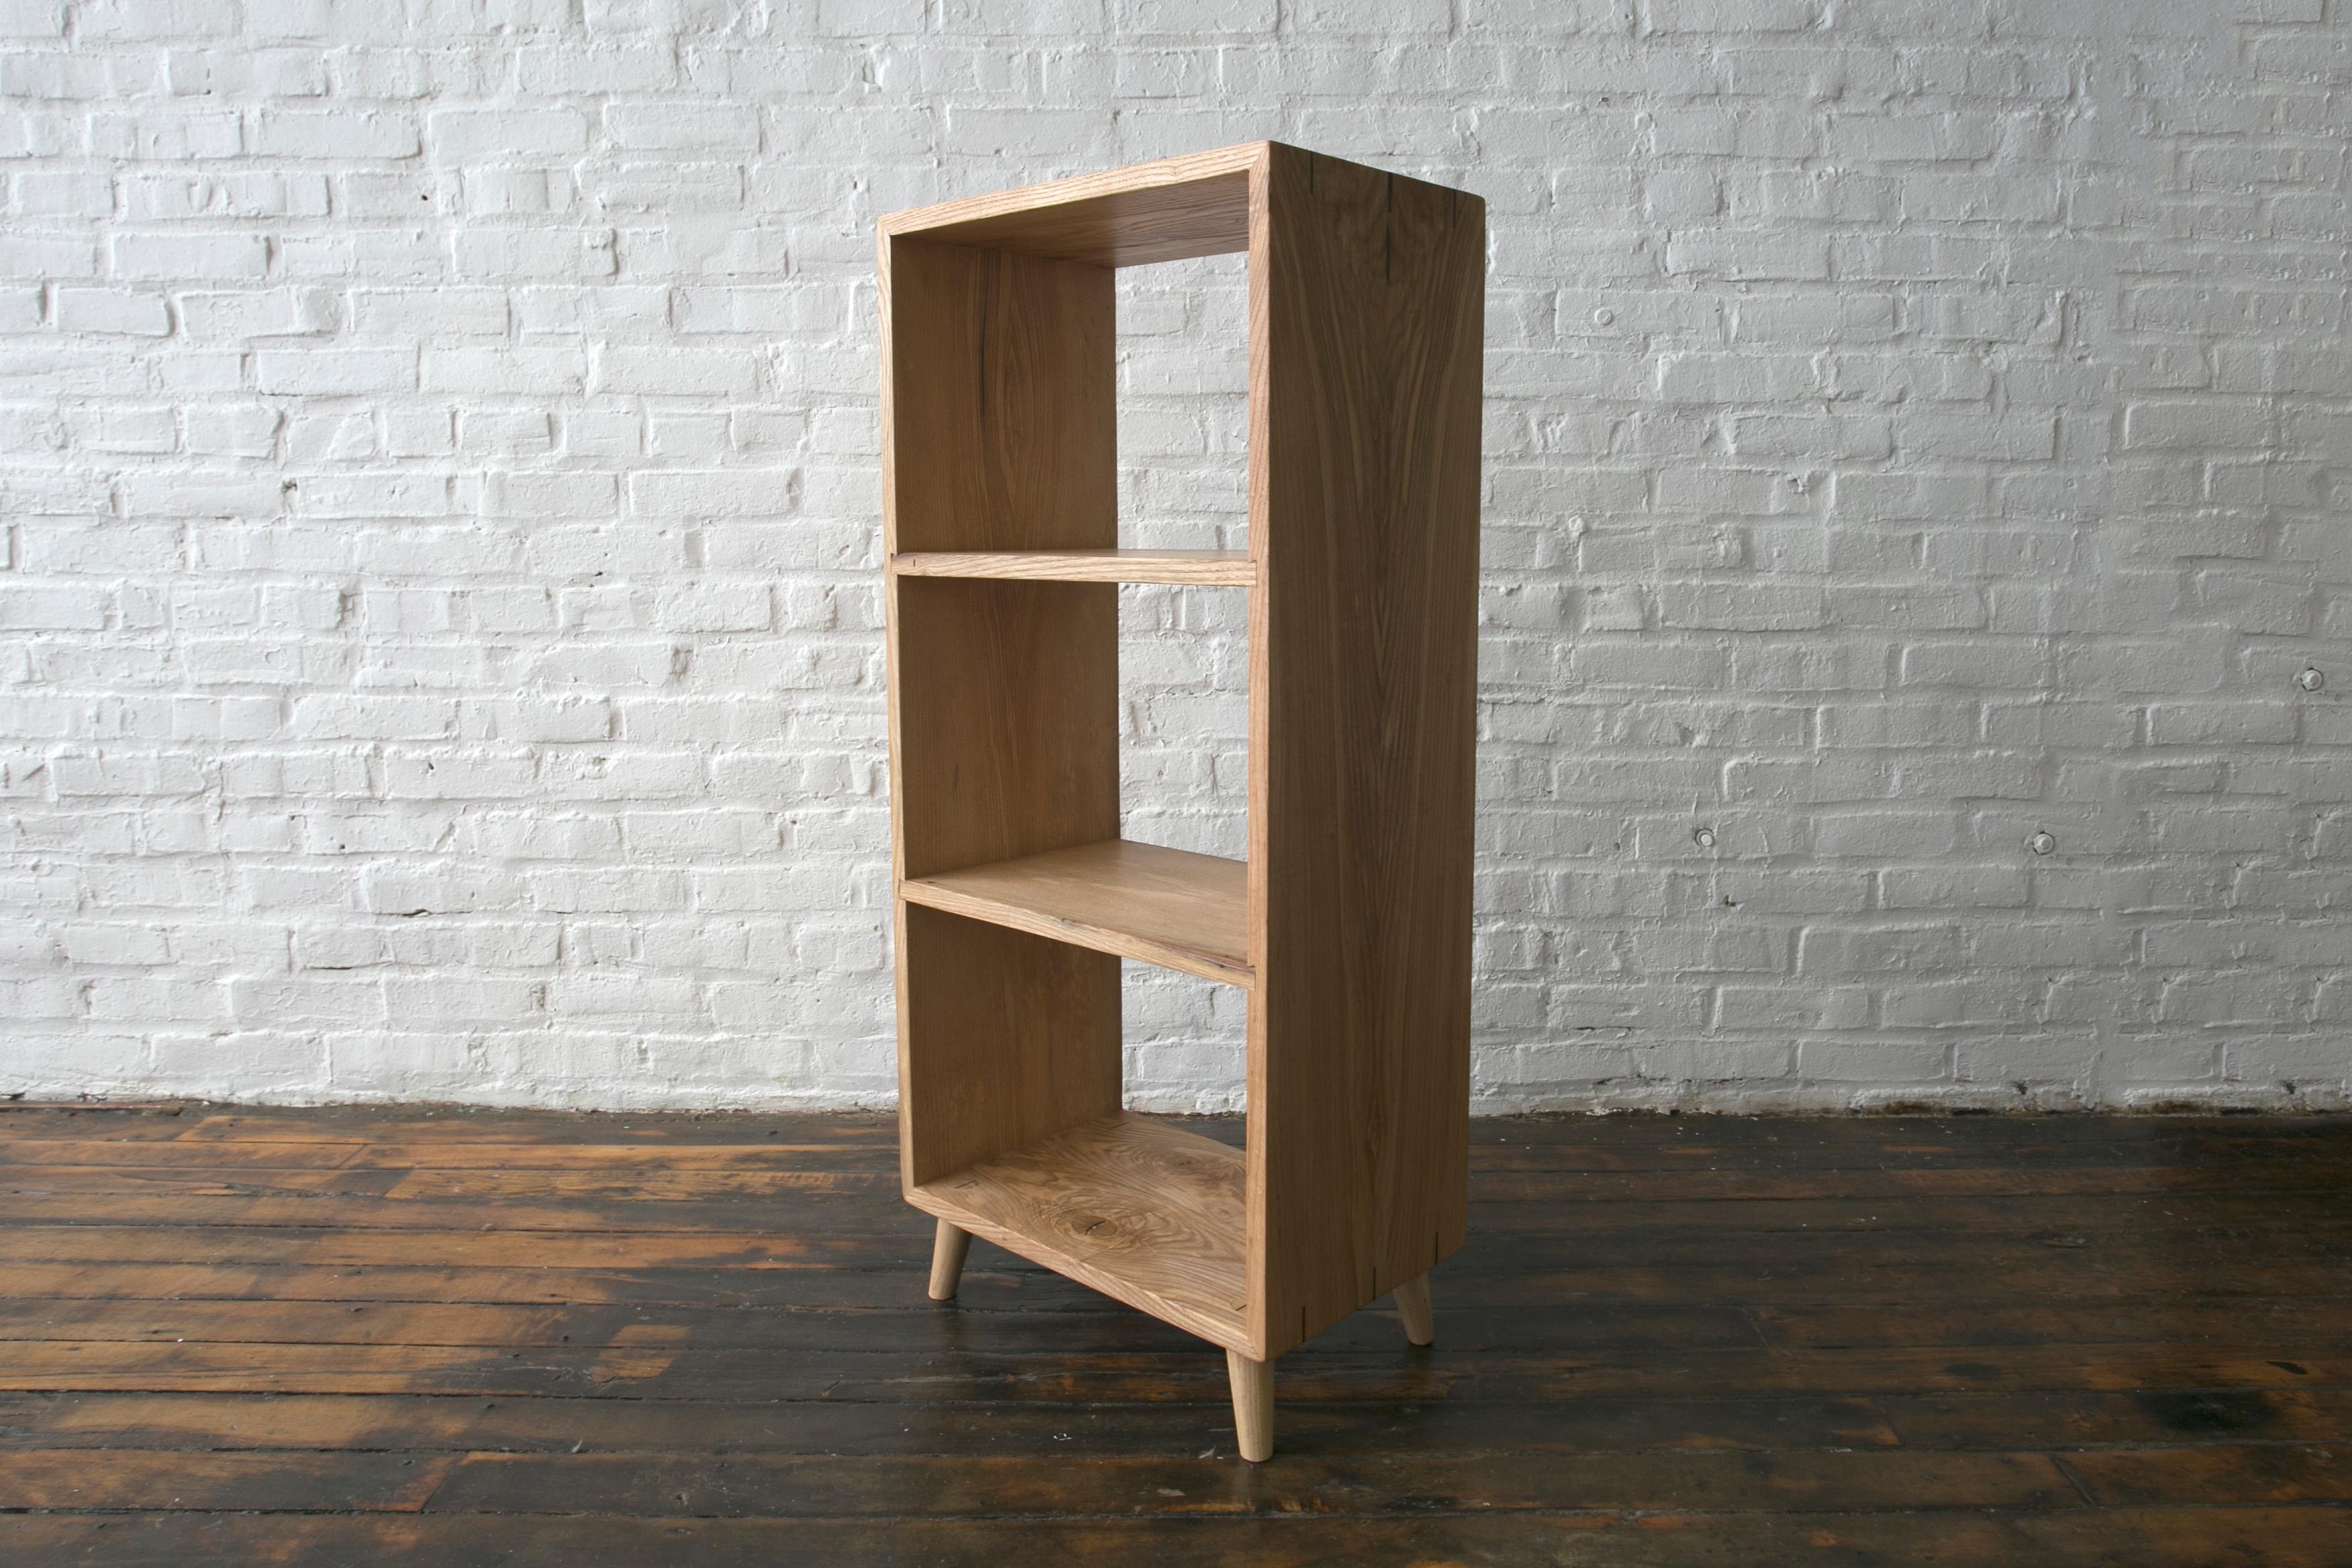 This modular piece is designed to be a flexible alternative to traditional shelving. It can be placed against a wall or as a freestanding room divider and used to store records, books, boxes and more. The free standing shelf has a beautiful